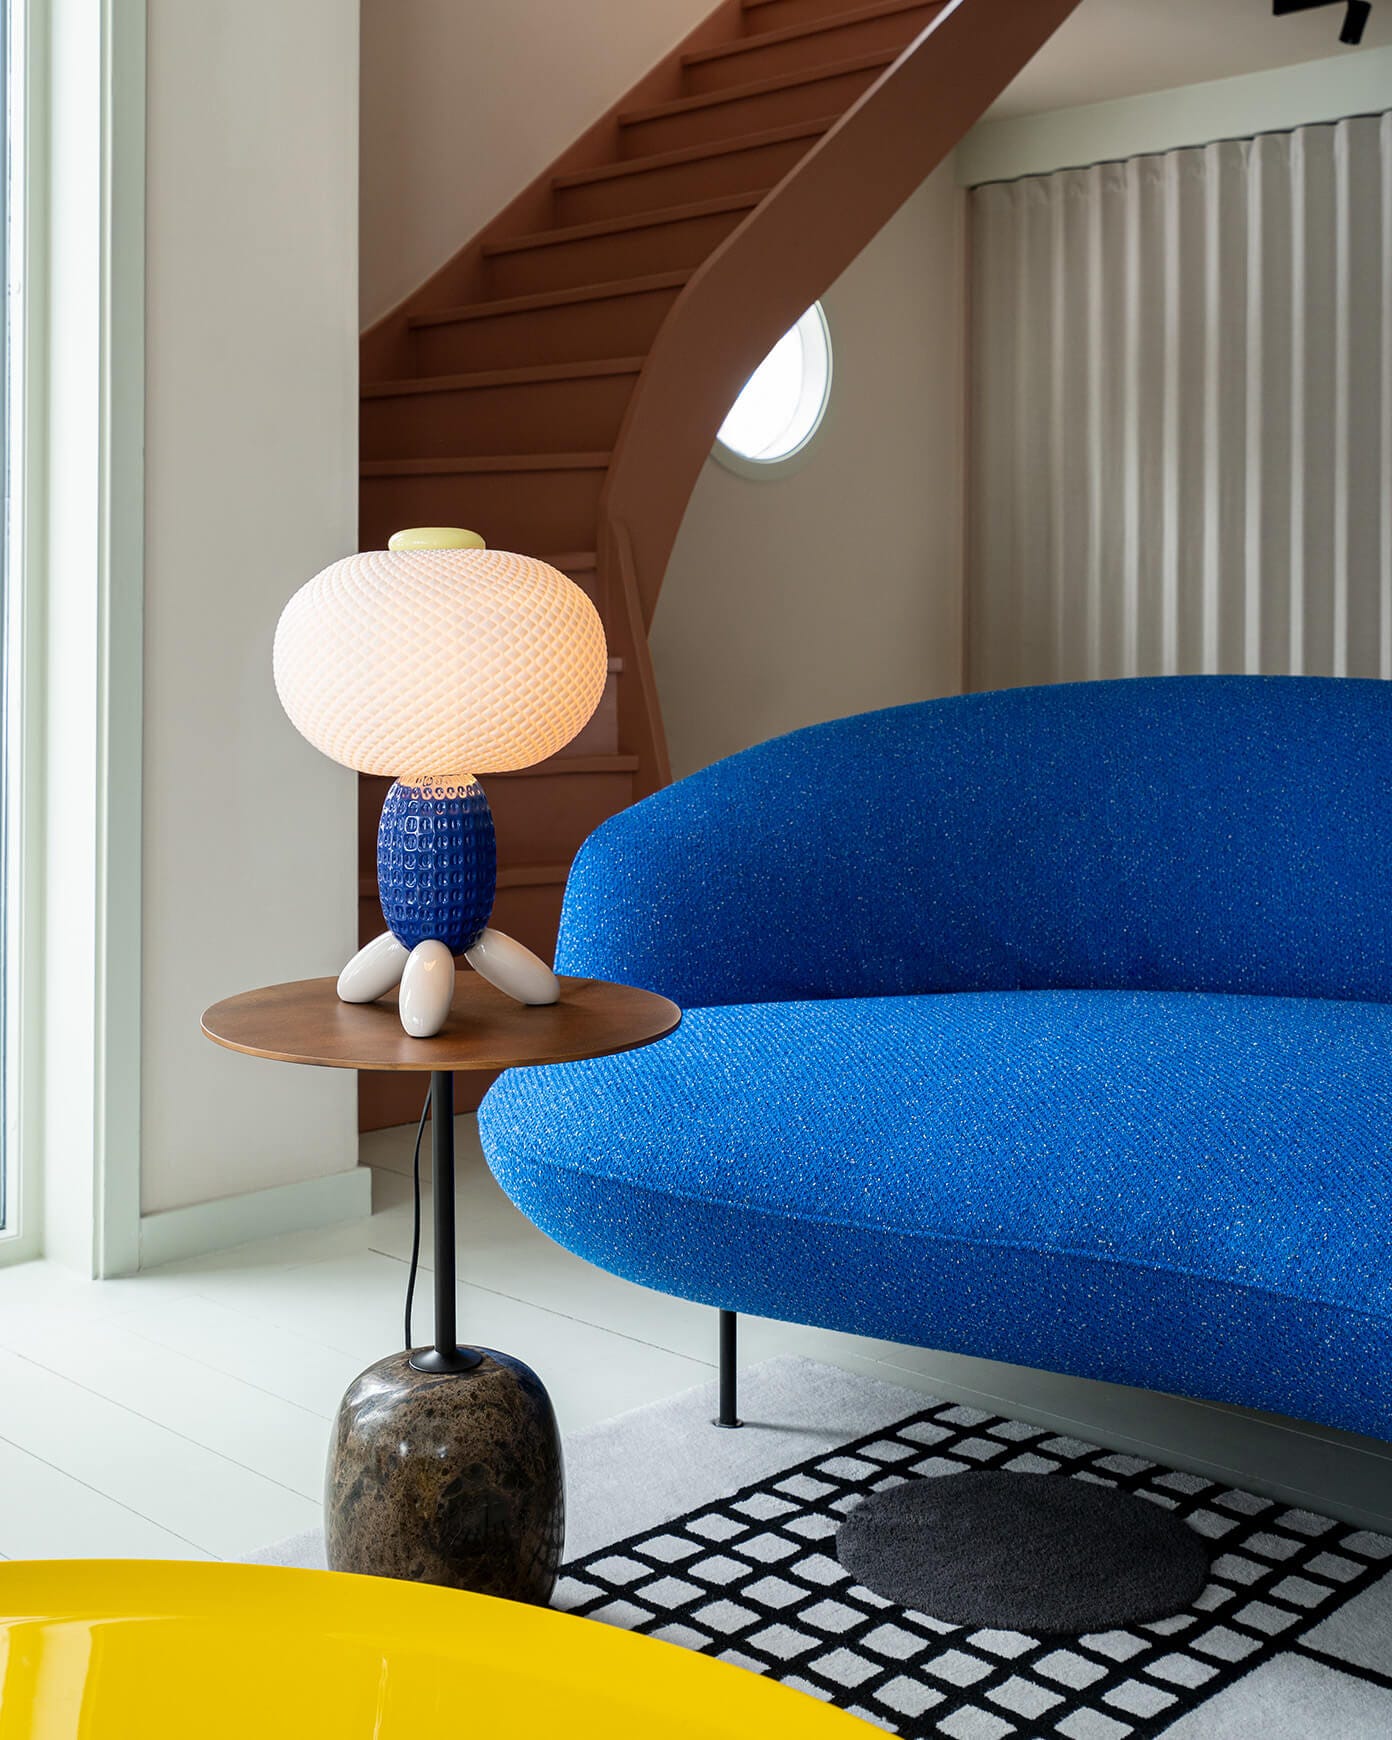 Yellow Soft Blown table lamp decorating a modern reading nook